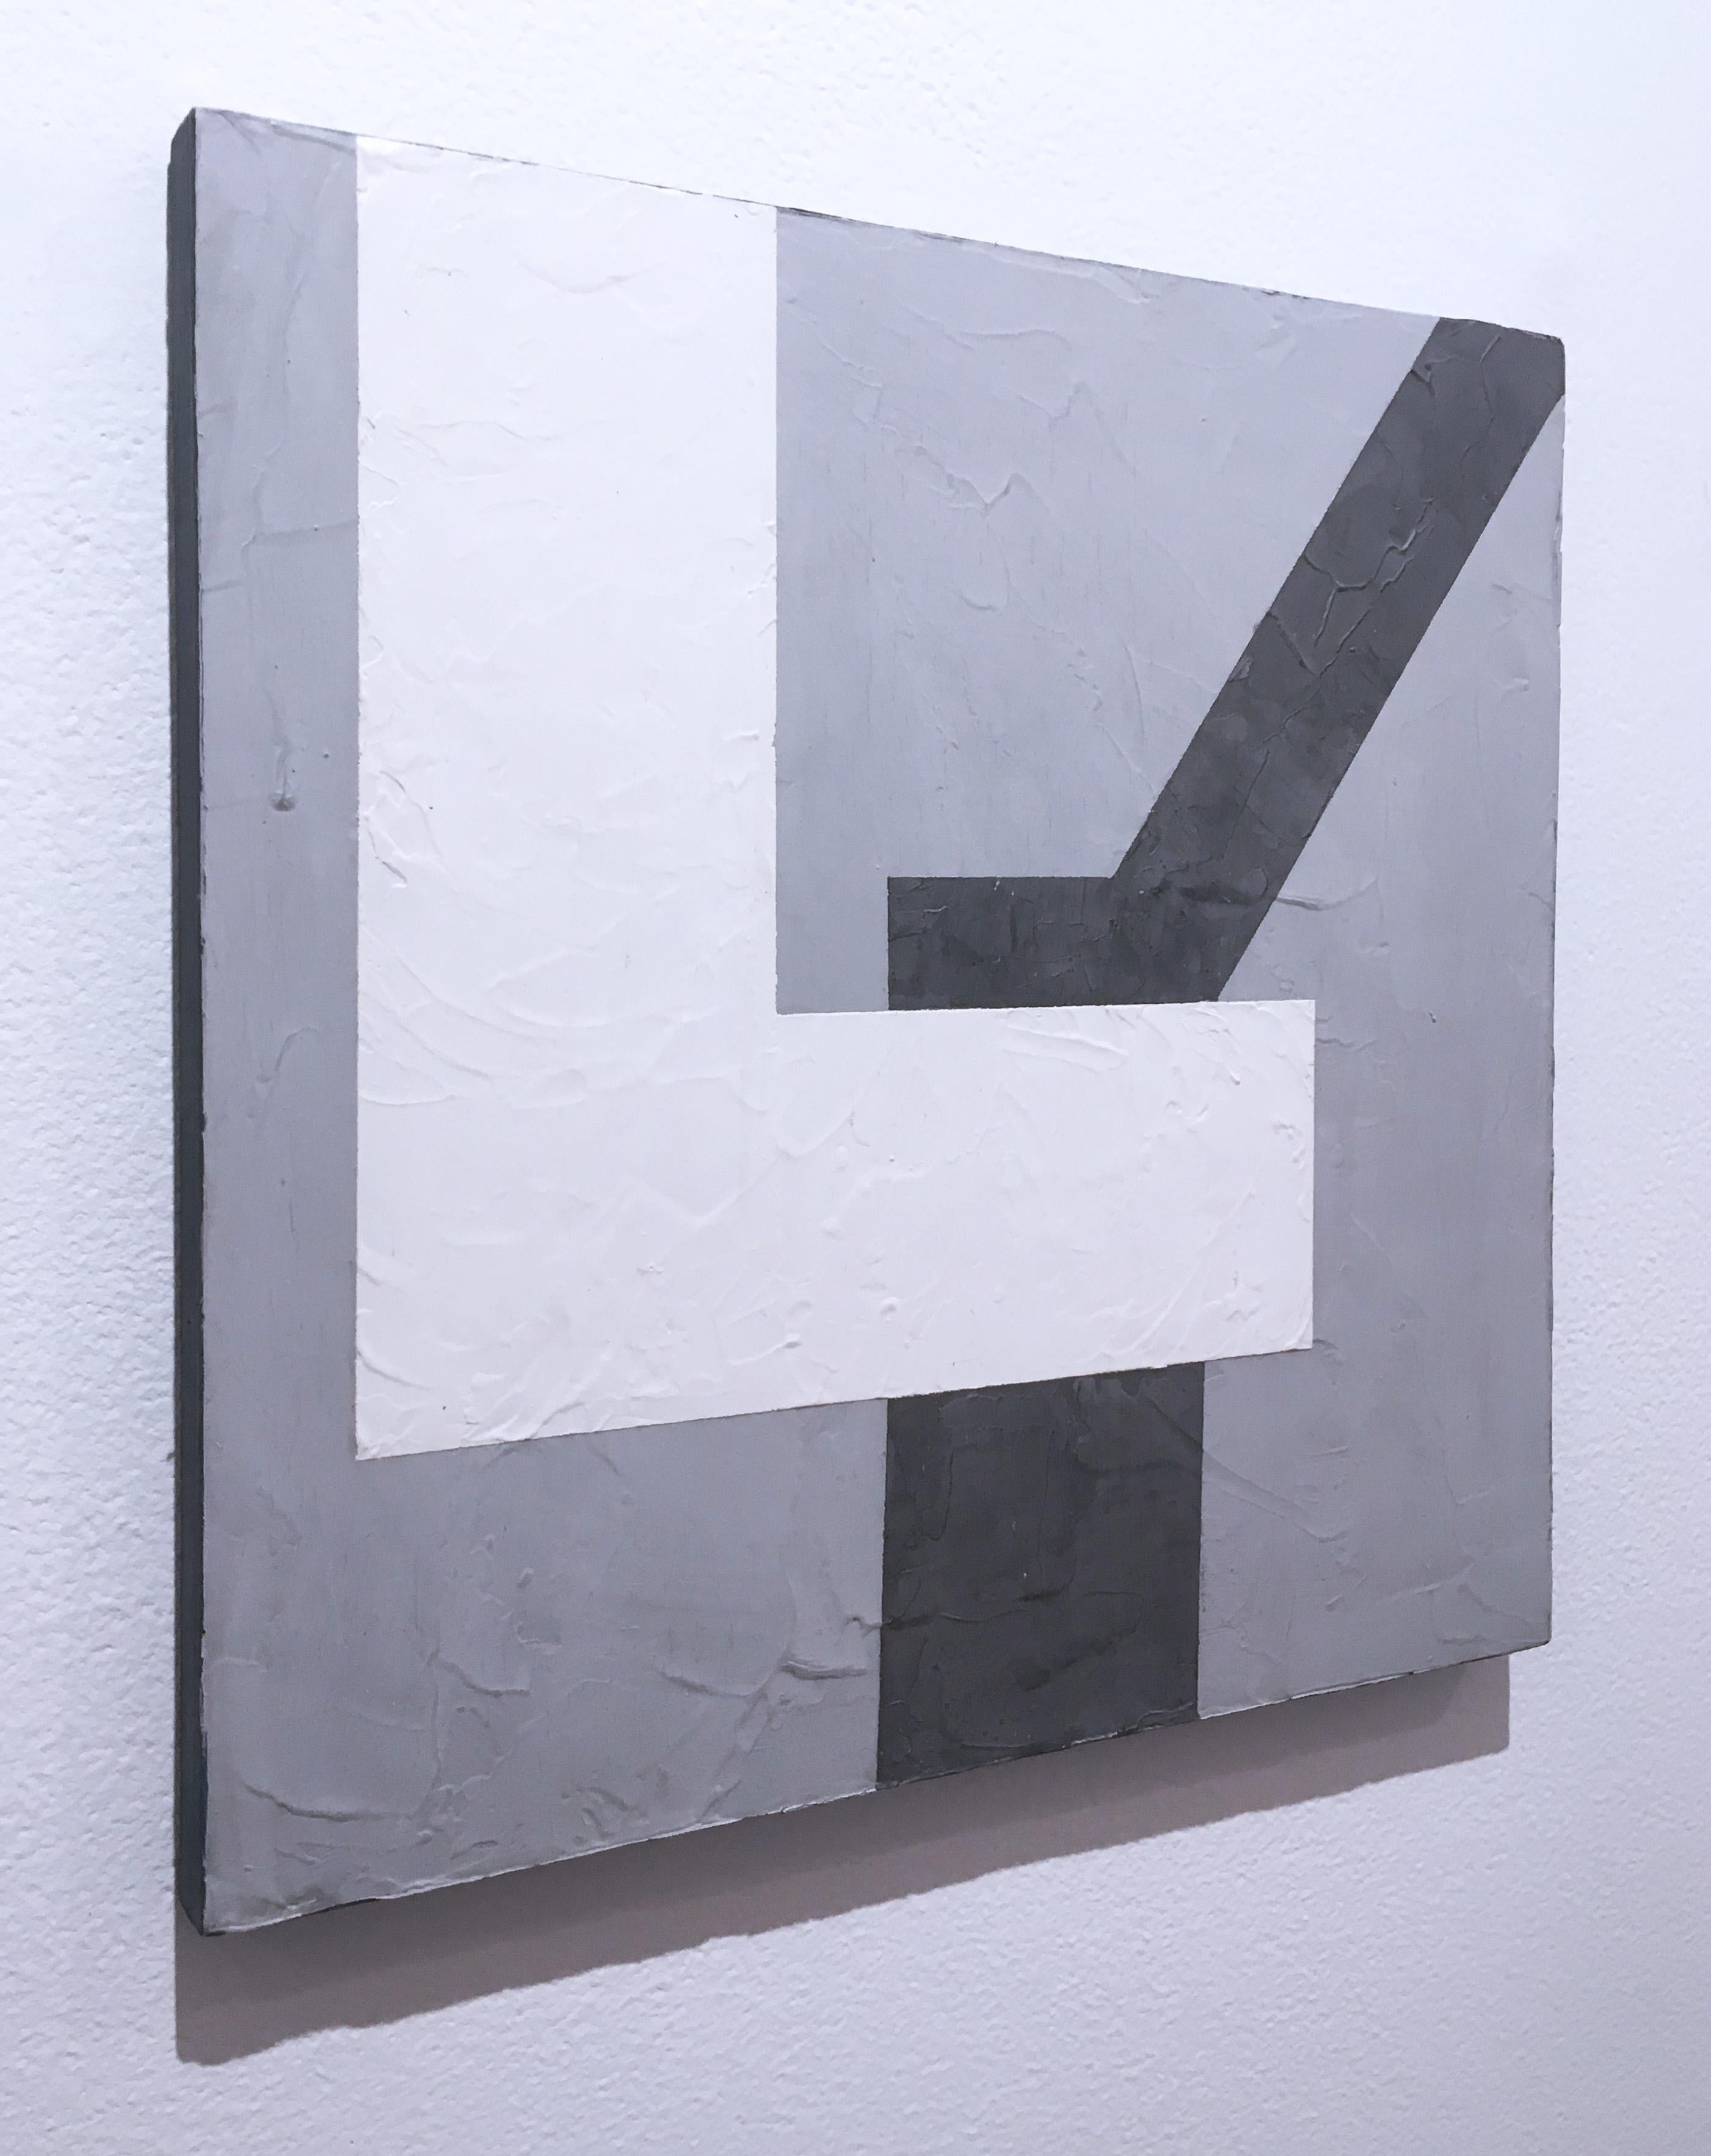 Balancing I, 2019, Abstract geometry, non-objective, plaster, black, white gray - Abstract Geometric Mixed Media Art by Kati Vilim